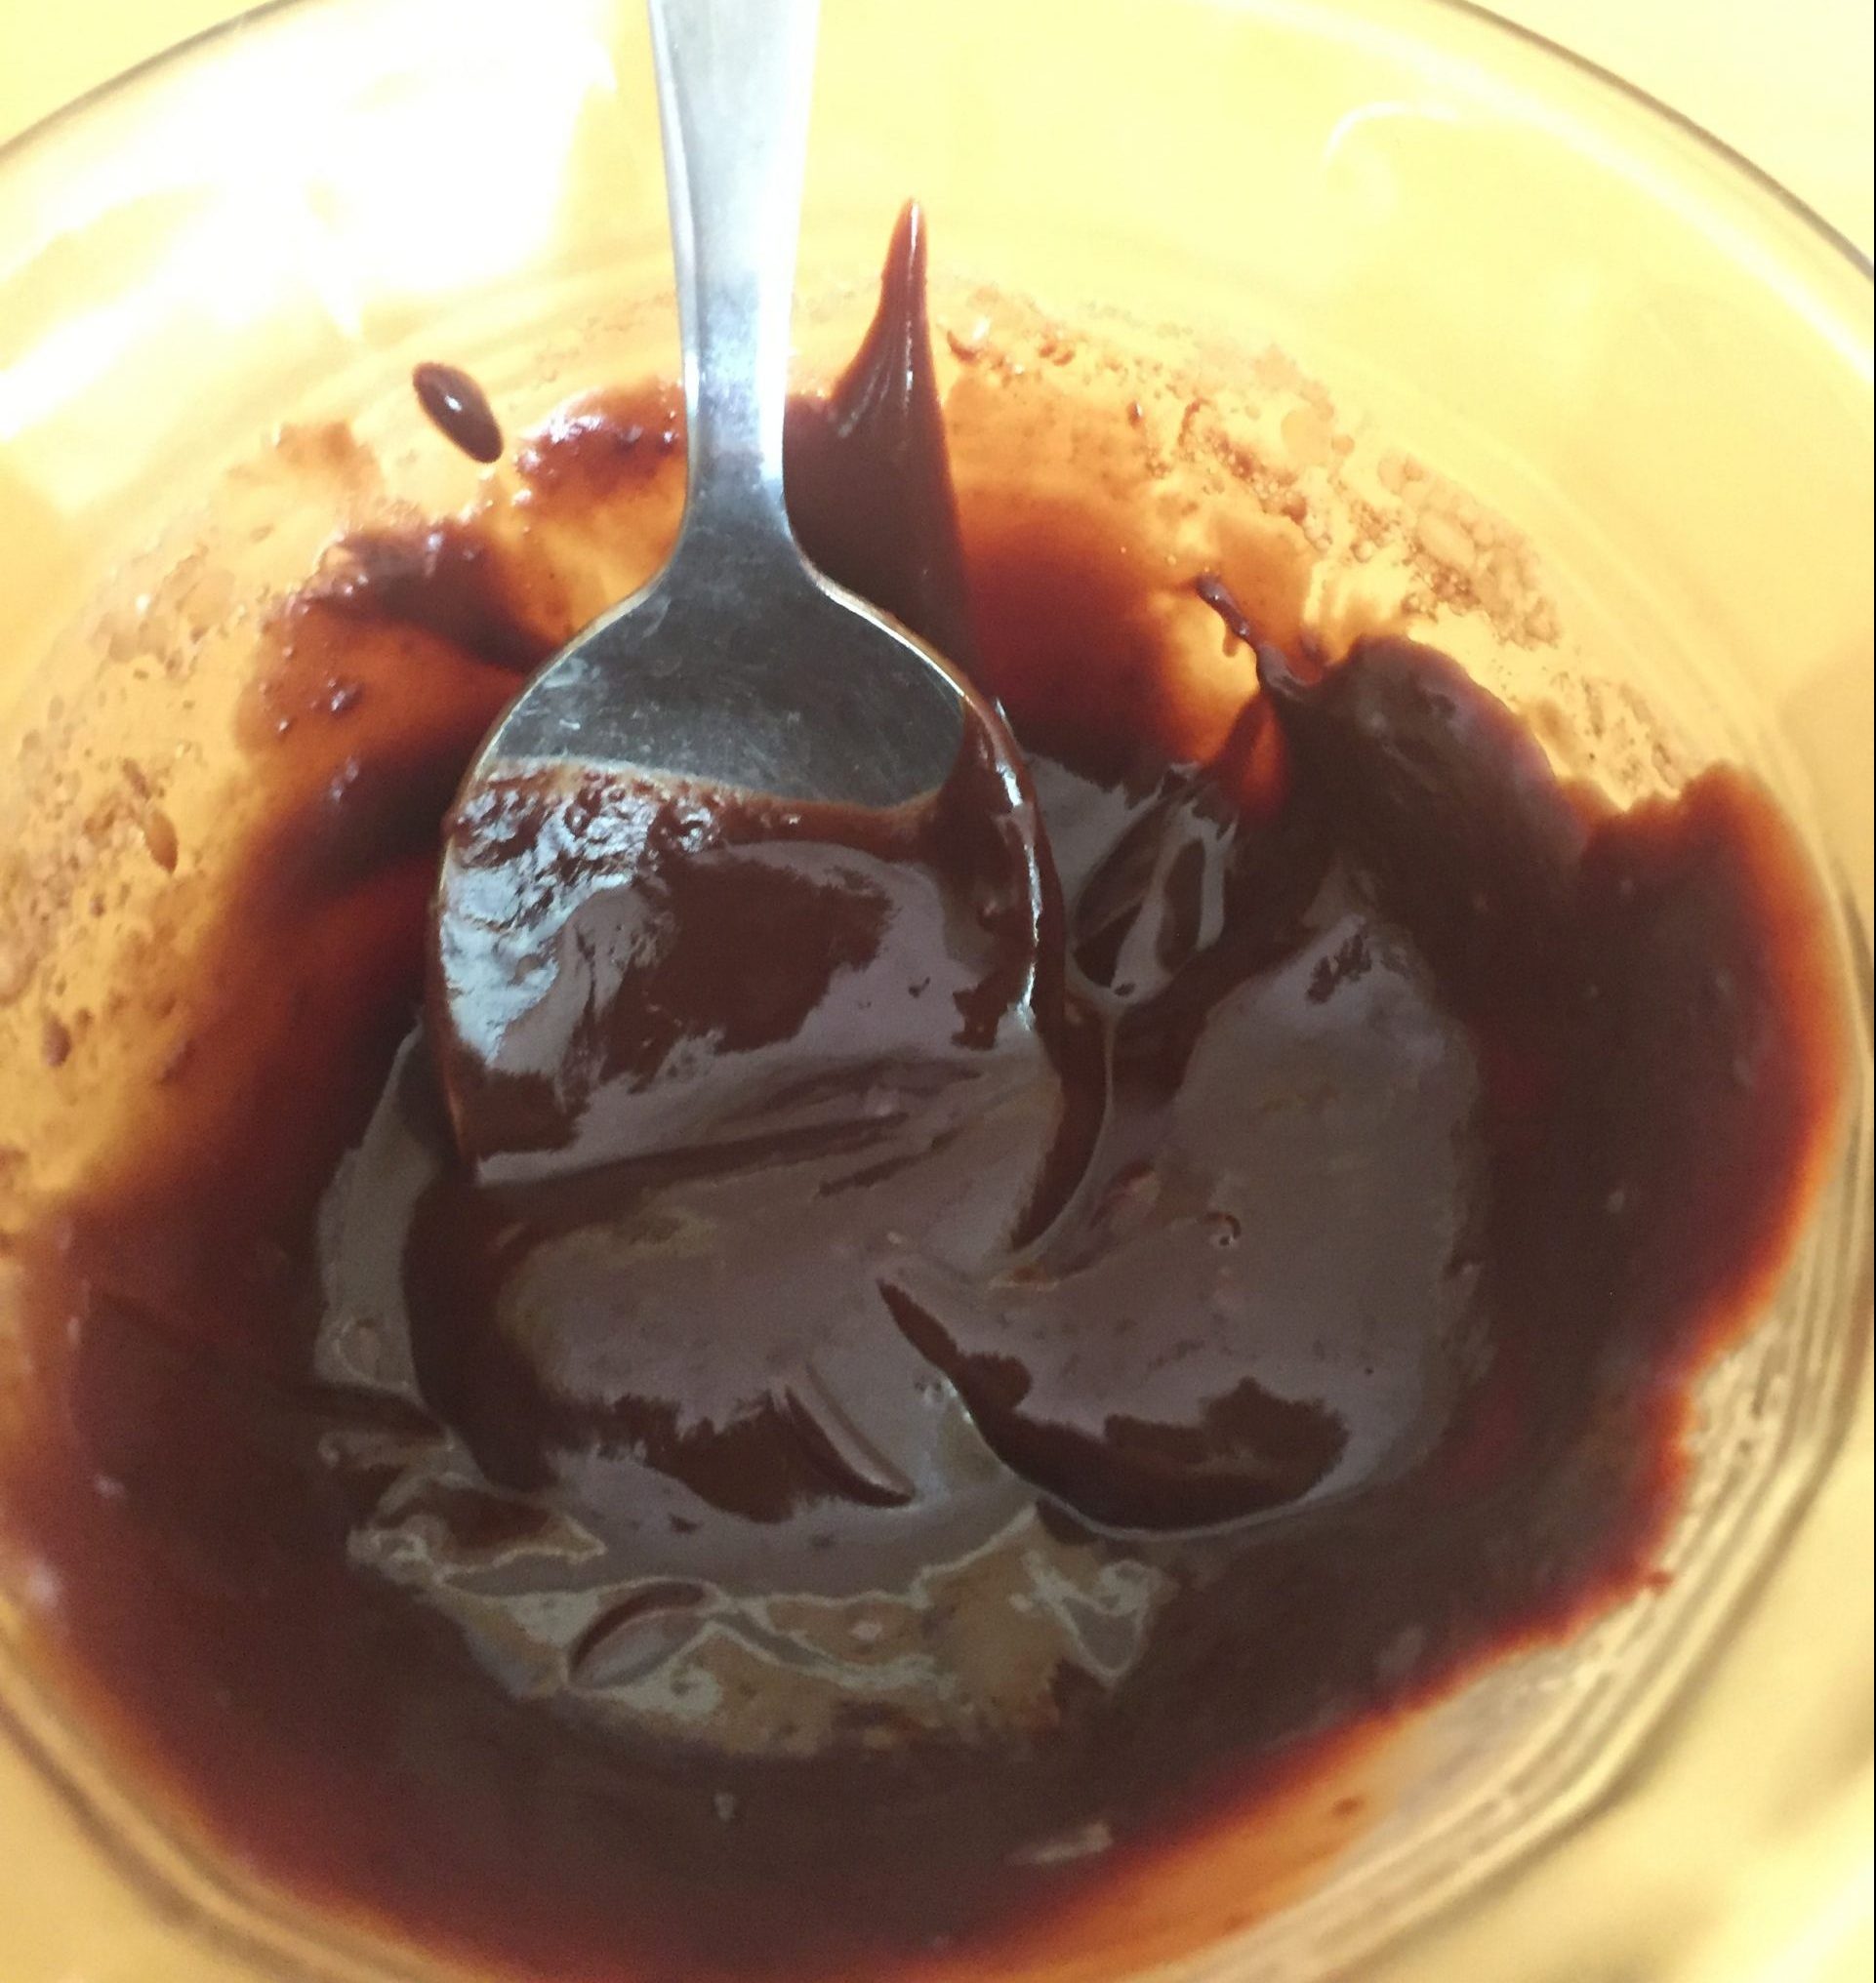 Melted chocolate with milk added before microwaving